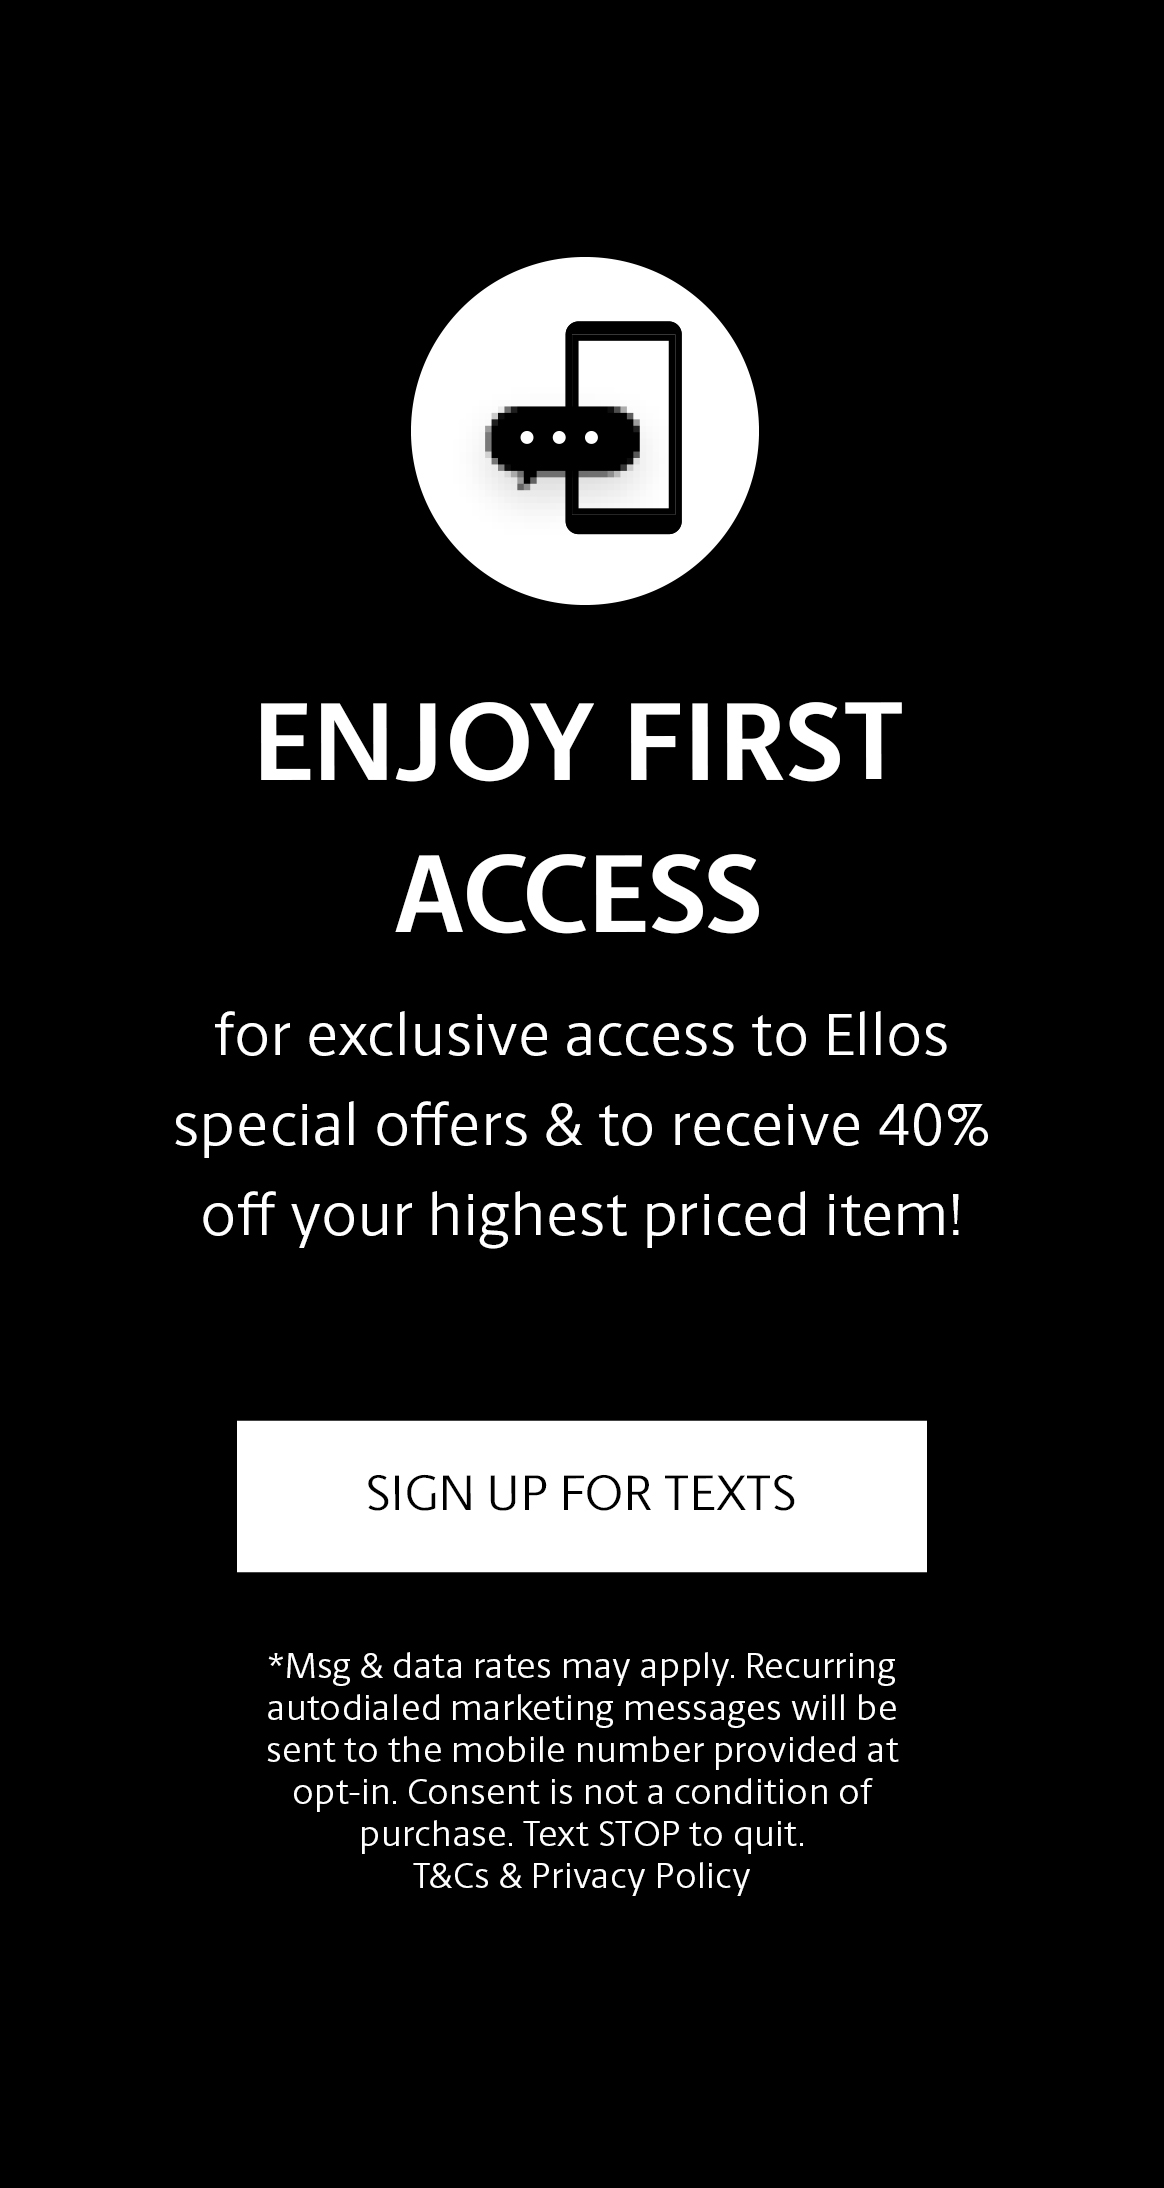 Enjoy First Access to special offers, new arrivals and more! Sign up for texts.